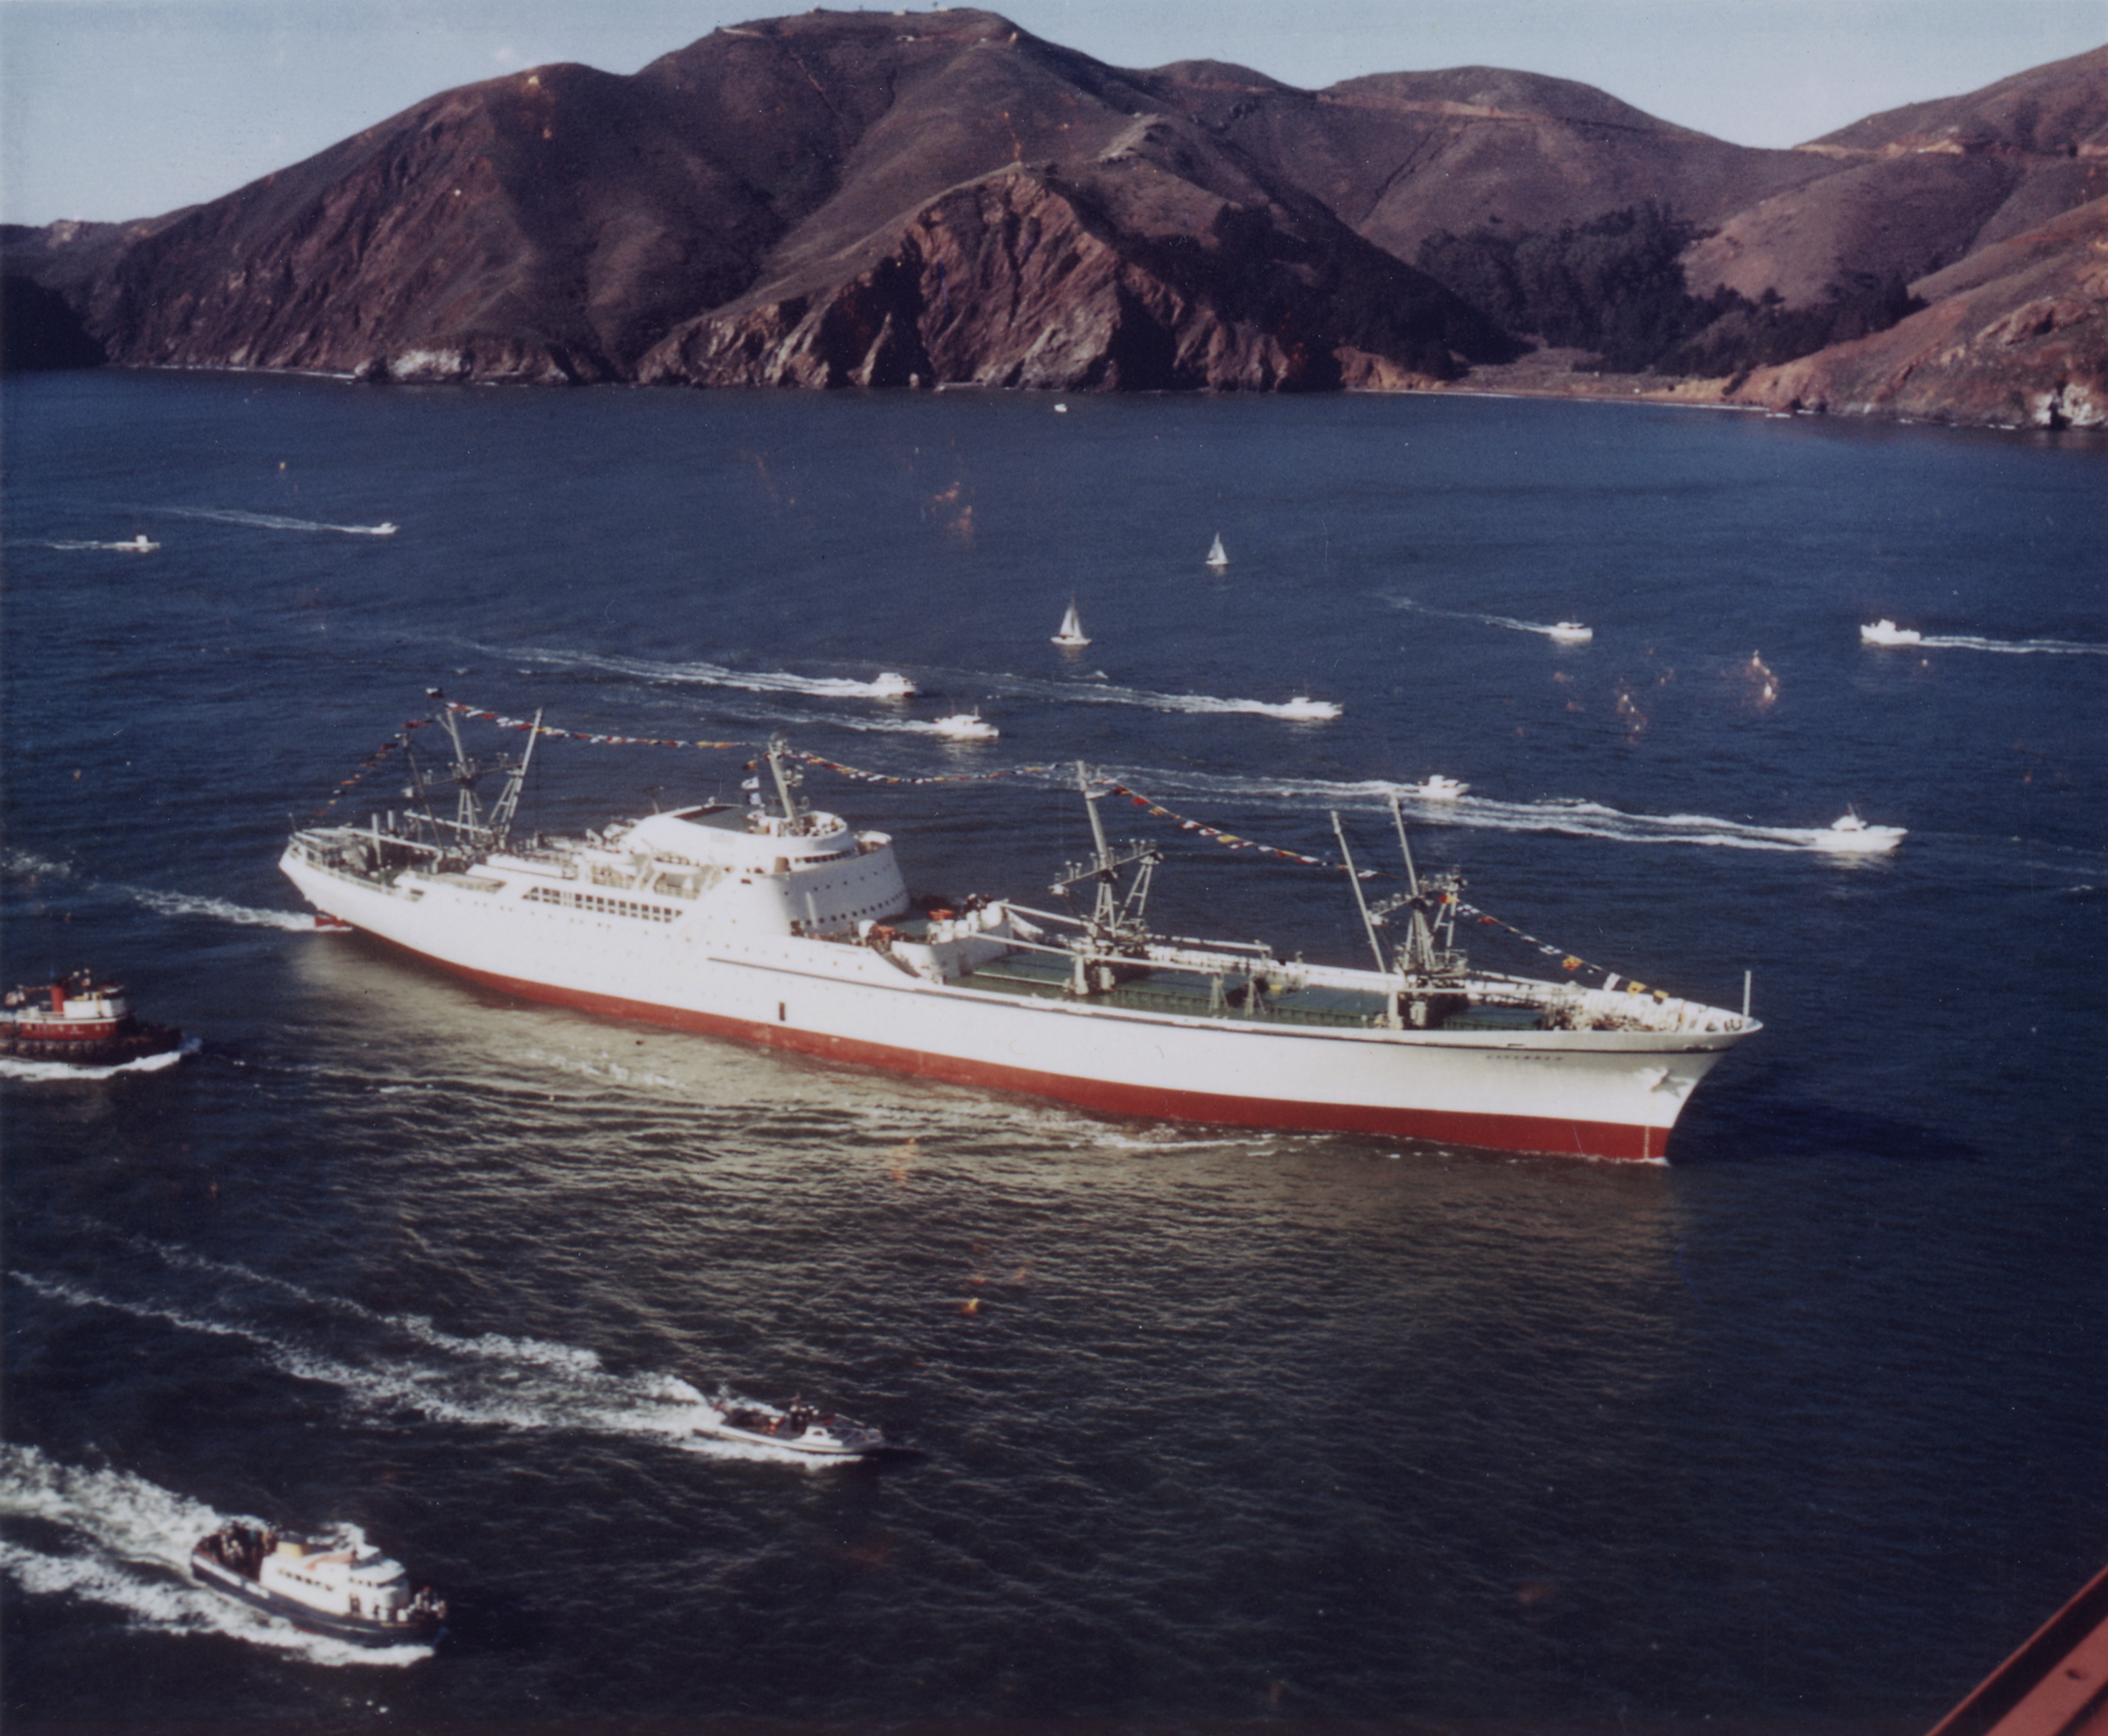 July 21, 1959 – The First Nuclear-Powered Merchant Ship, the NS Savannah, is Launched